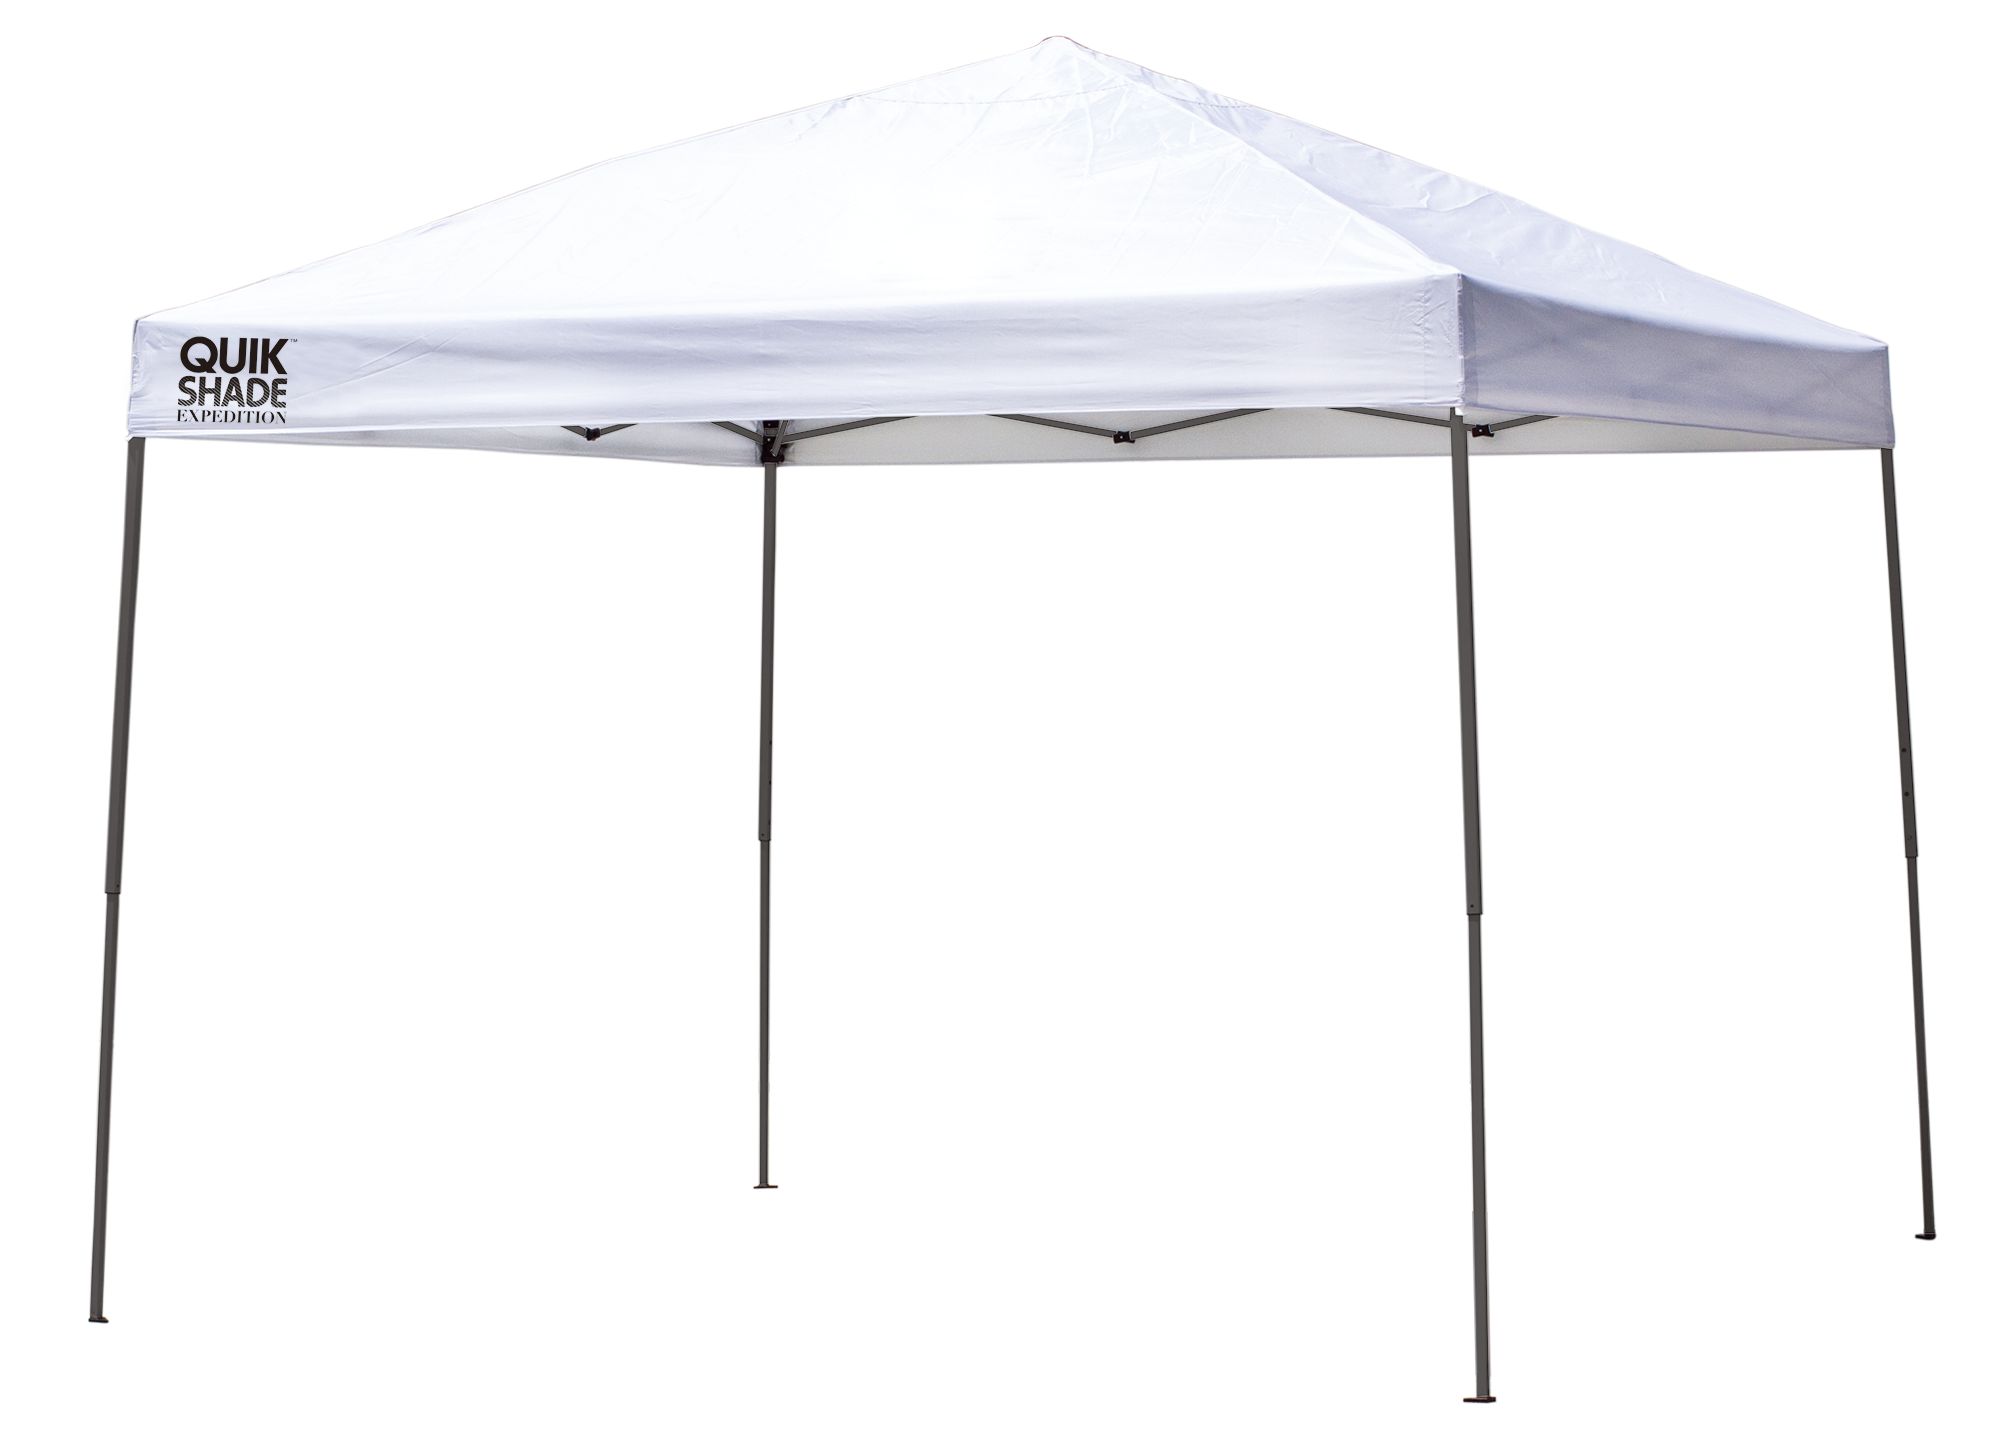 Quik Shade 167512DS EX100 10 x 10 ft. Straight Leg Canopy, White Cover - Gray Frame - image 1 of 9